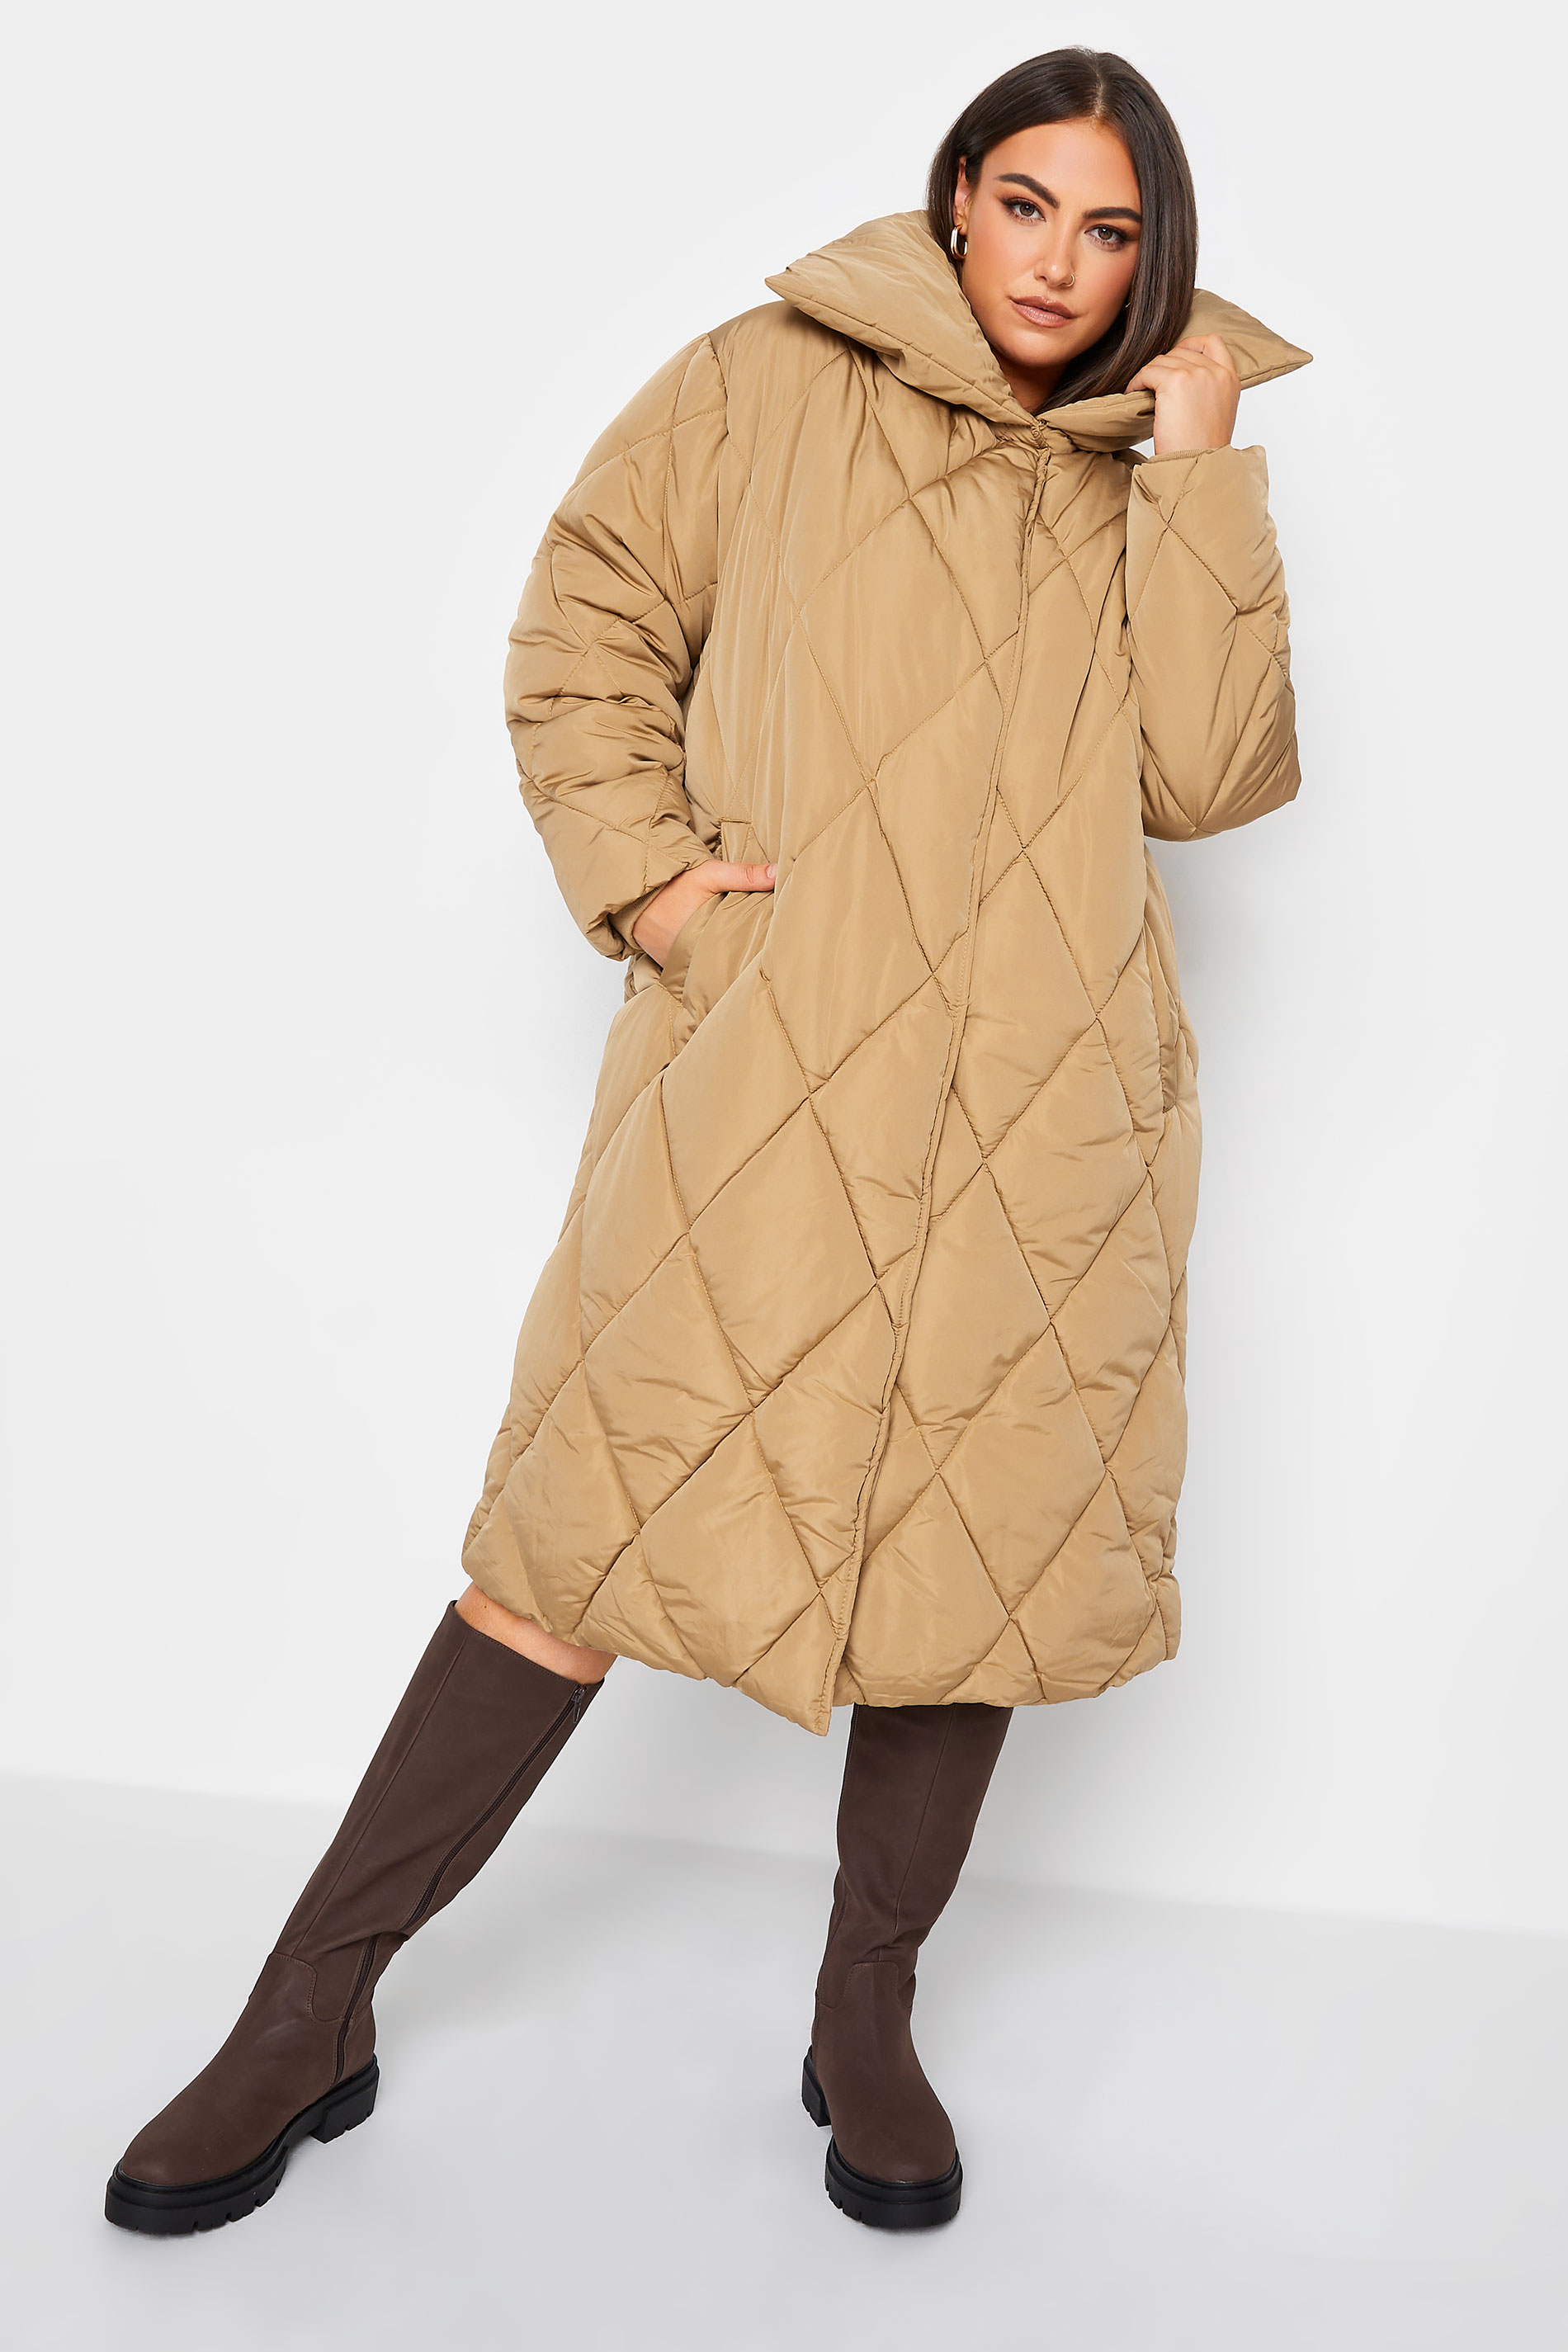 Yours Curve Beige Brown Quilted Puffer Coat, Women's Curve & Plus Size, Yours